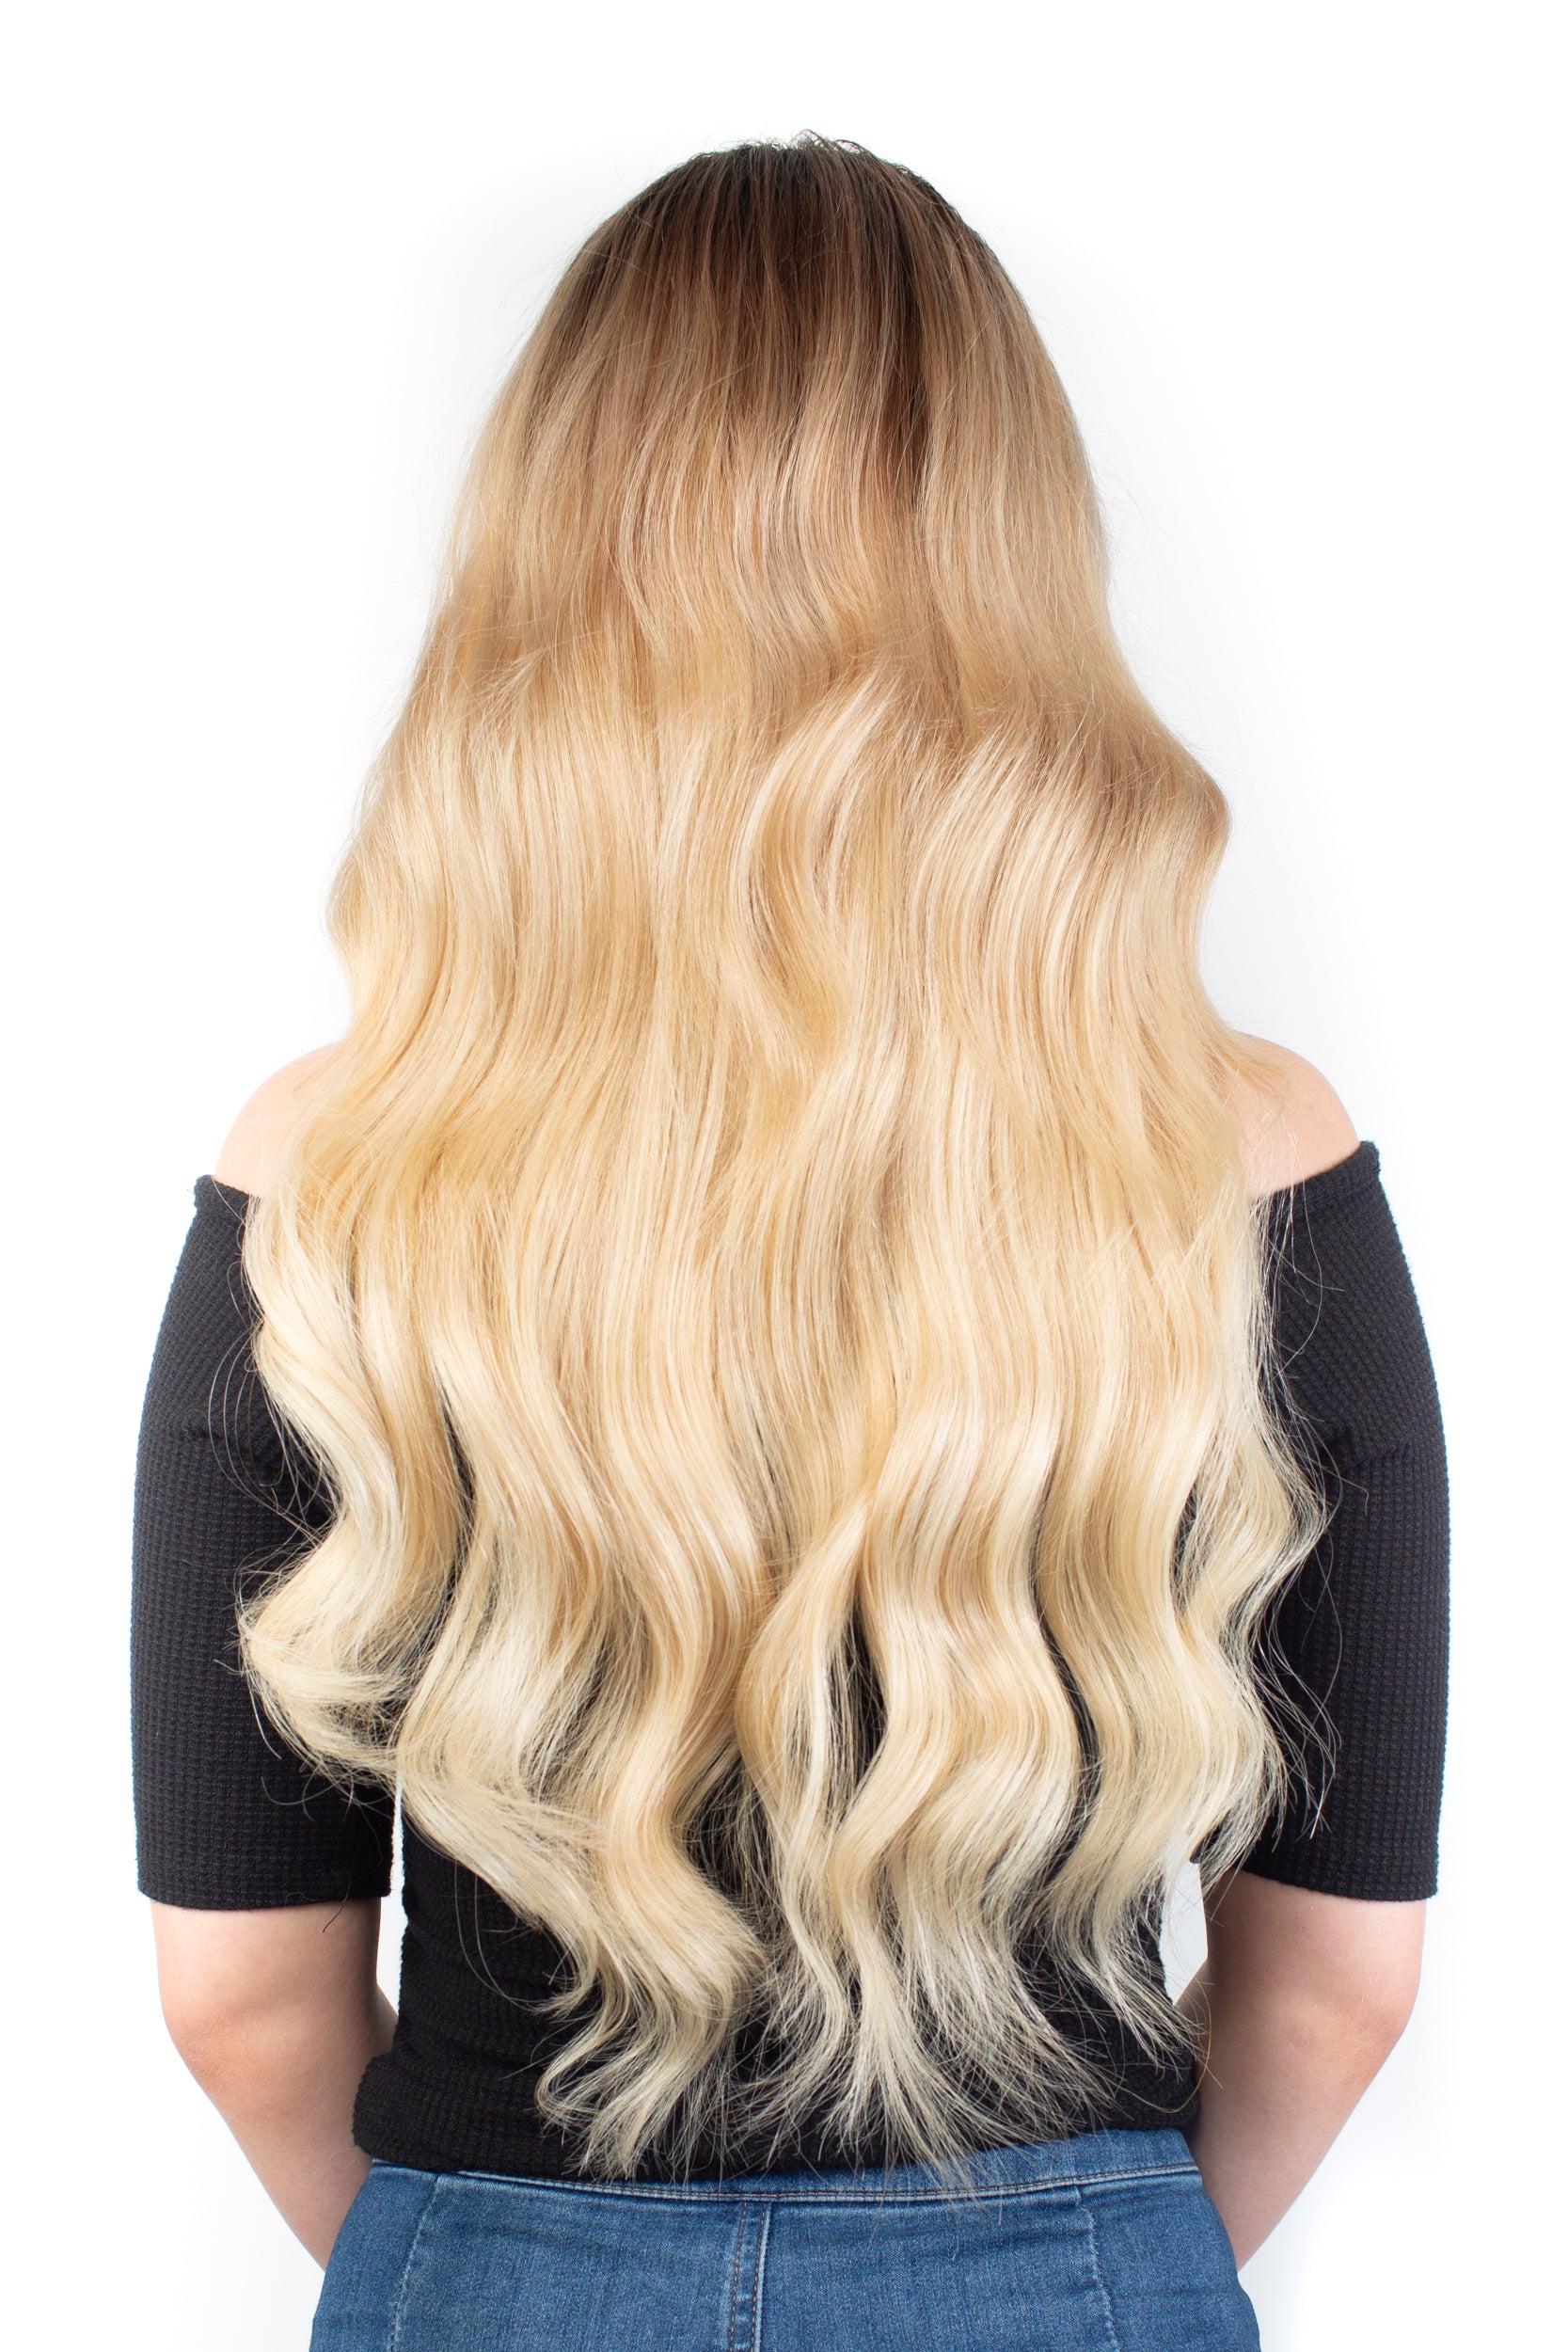 14" Gold Clip-in hair extensions